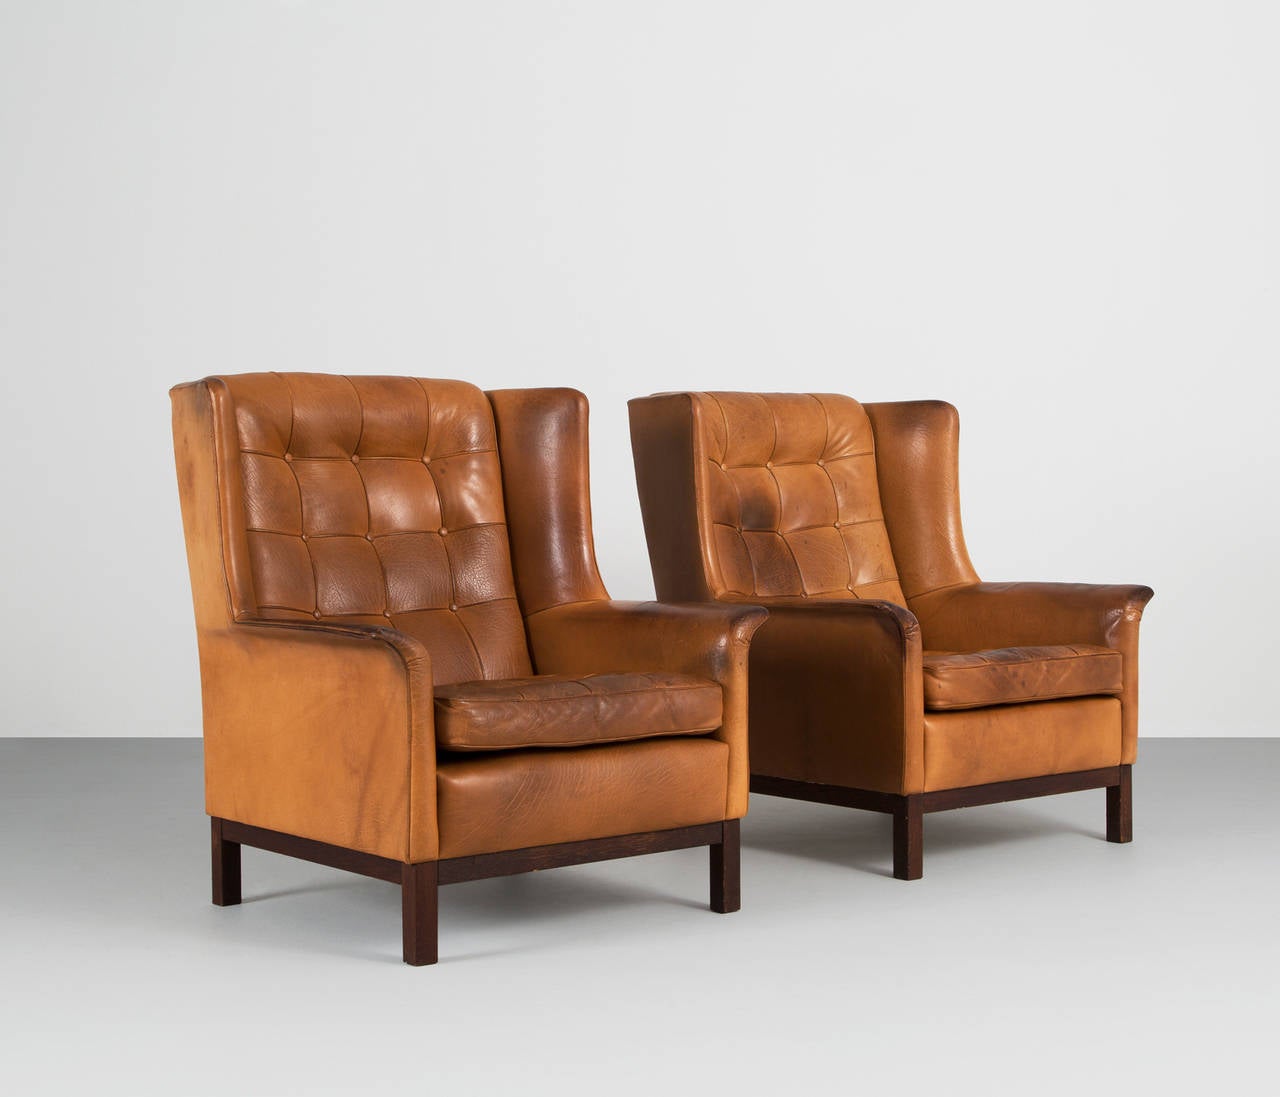 Pair of highback chairs, in leather and rosewood, by Arne Norell, Sweden, 1960s. 

Wonderful pair of comfortable cognac buffalo leather easy chairs by Arne Norell. These chairs come with a very high standard of comfort, as where Norell is known